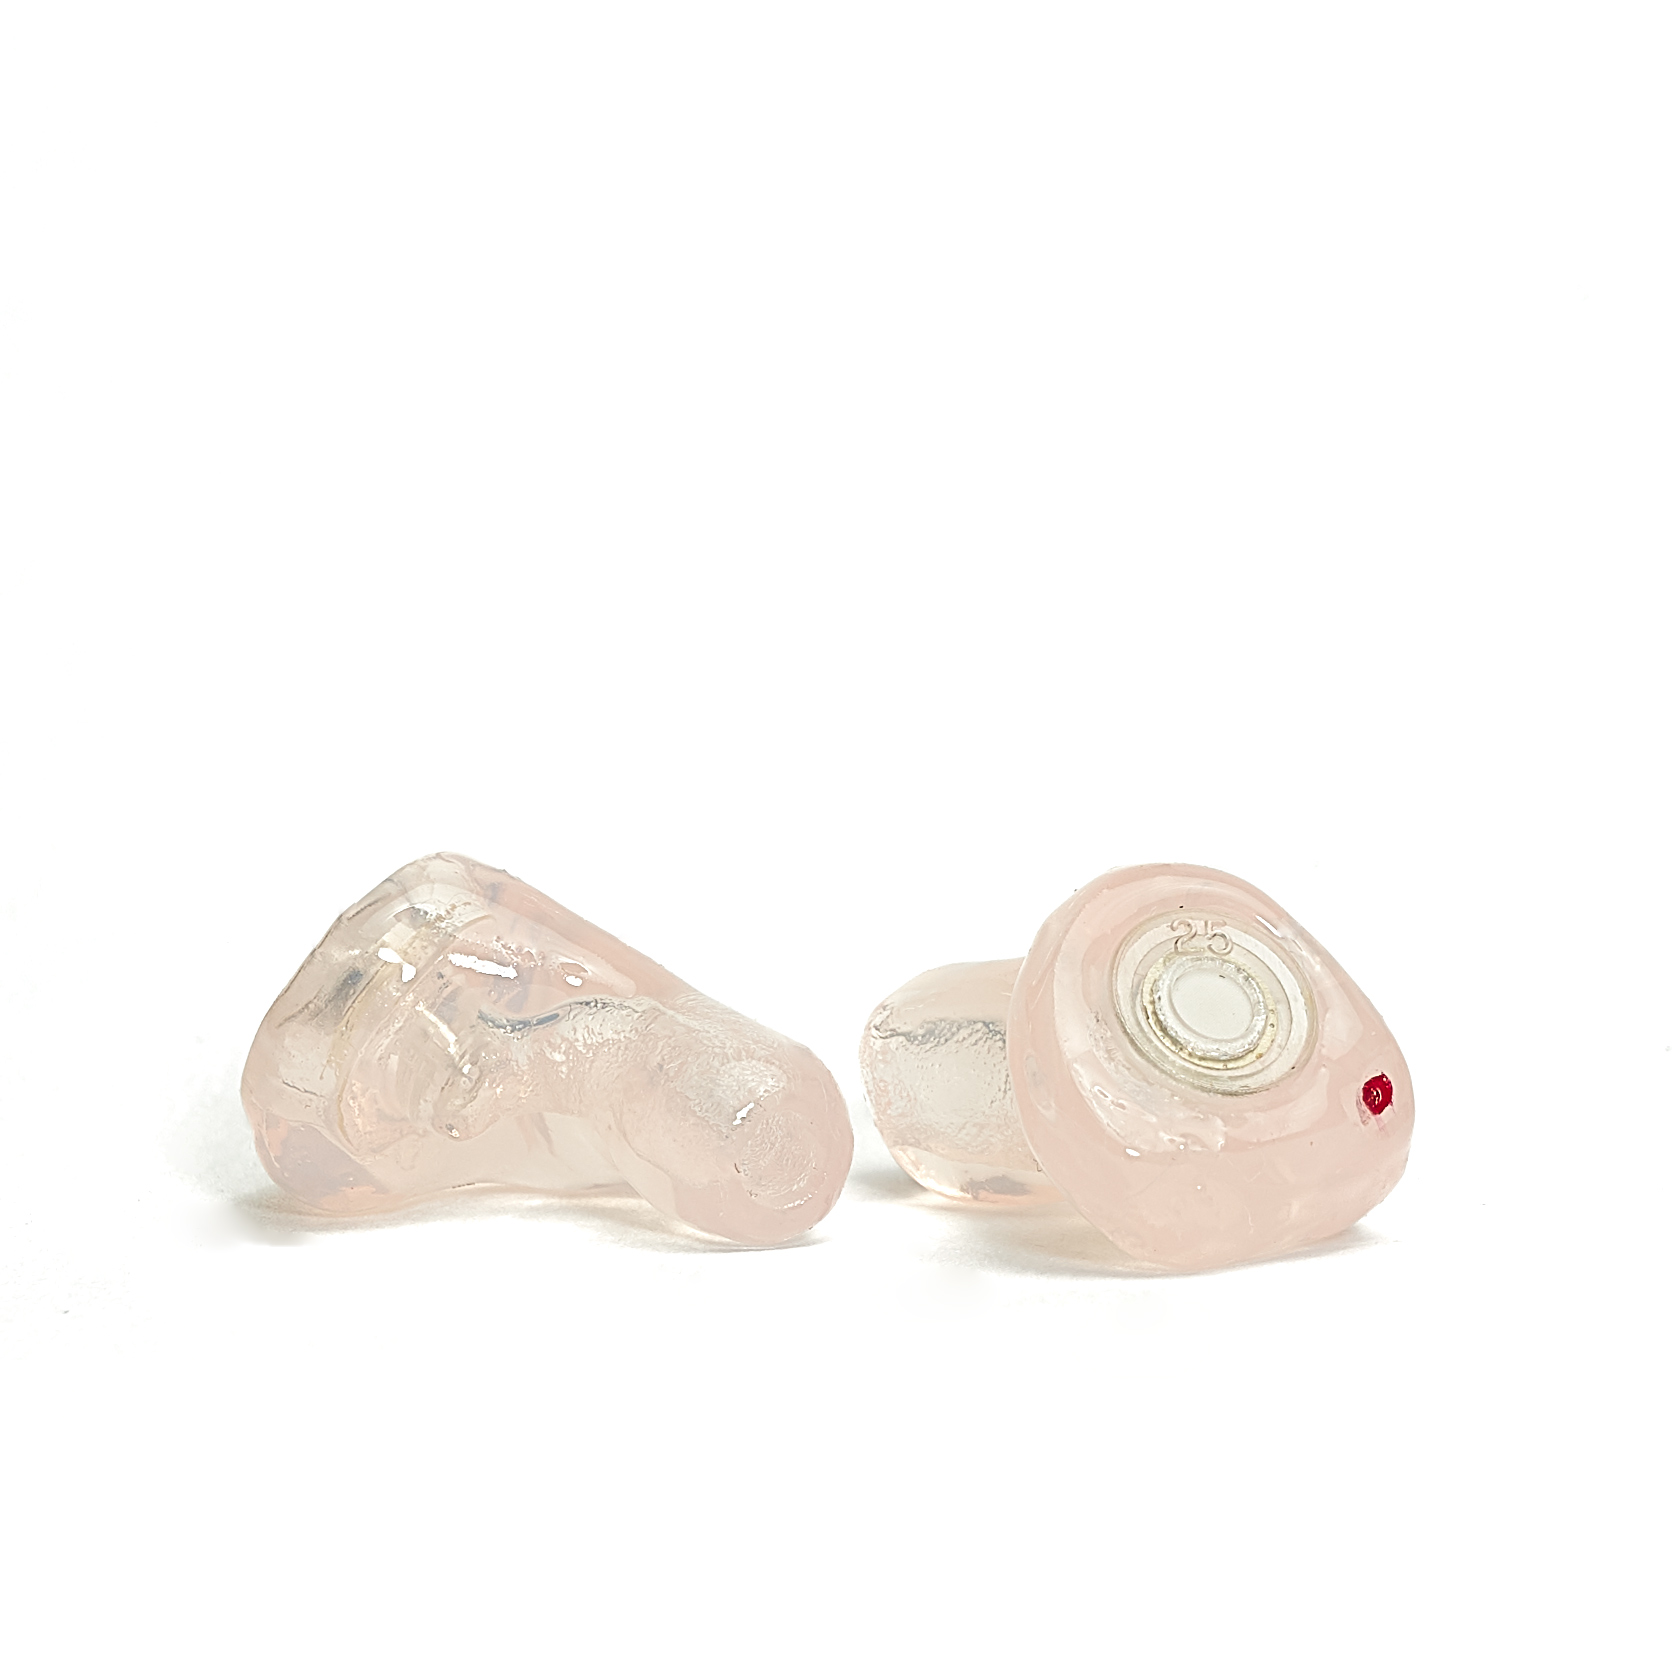 A pair of ER SERIES MUSICIAN EARPLUGS - CUSTOM from Sensaphonics, in translucent, with a pinkish color